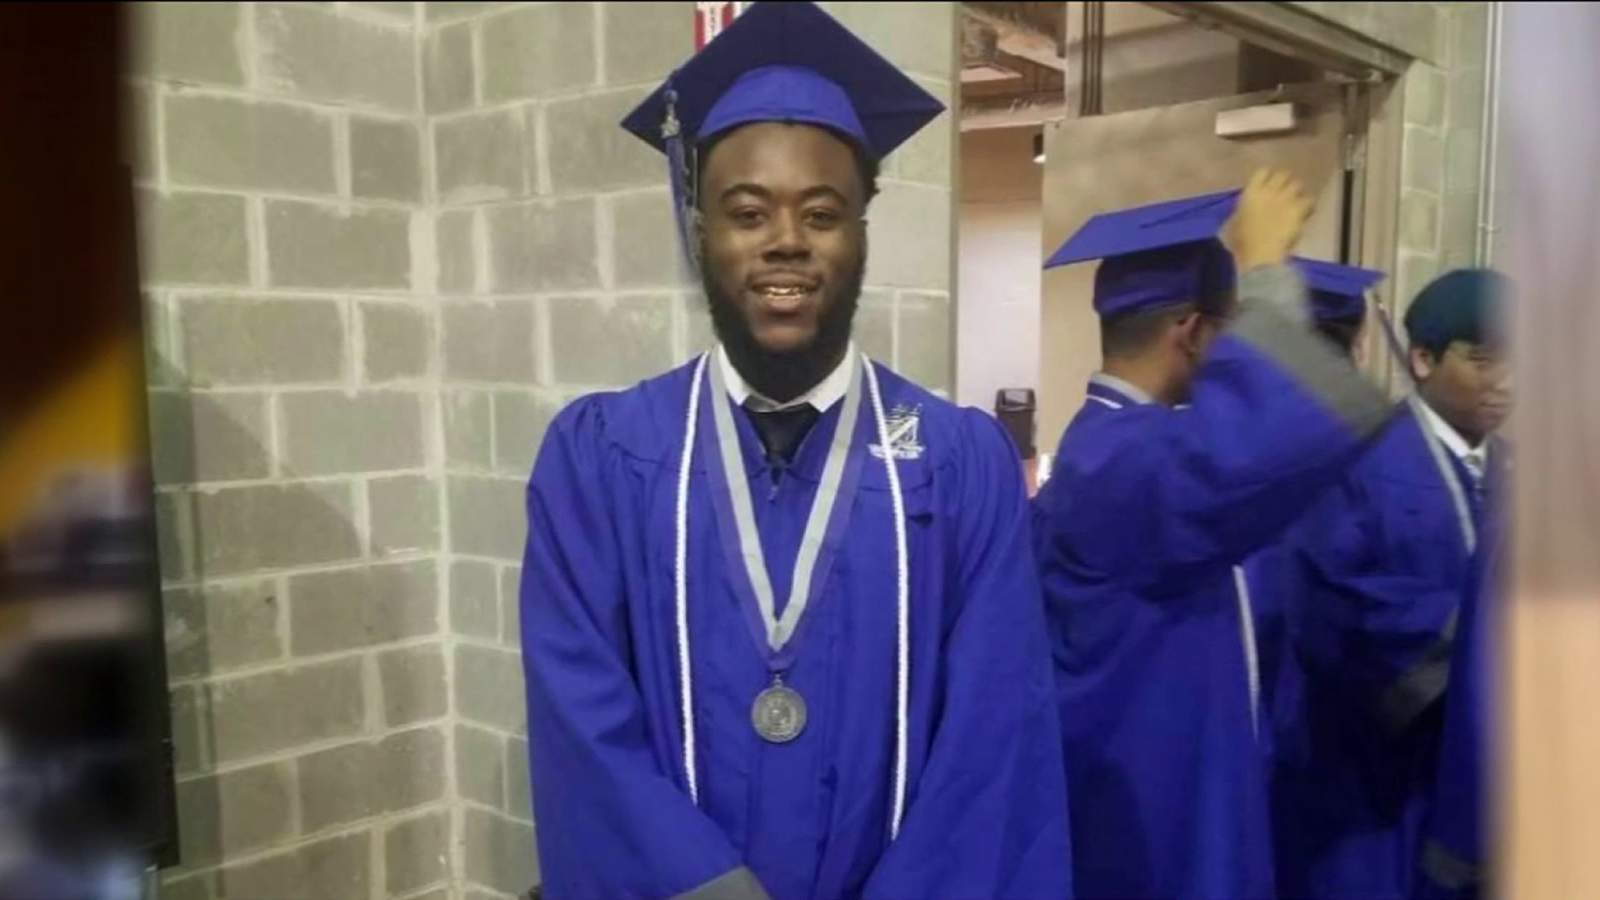 18-year-old’s family pleads for help finding his killer